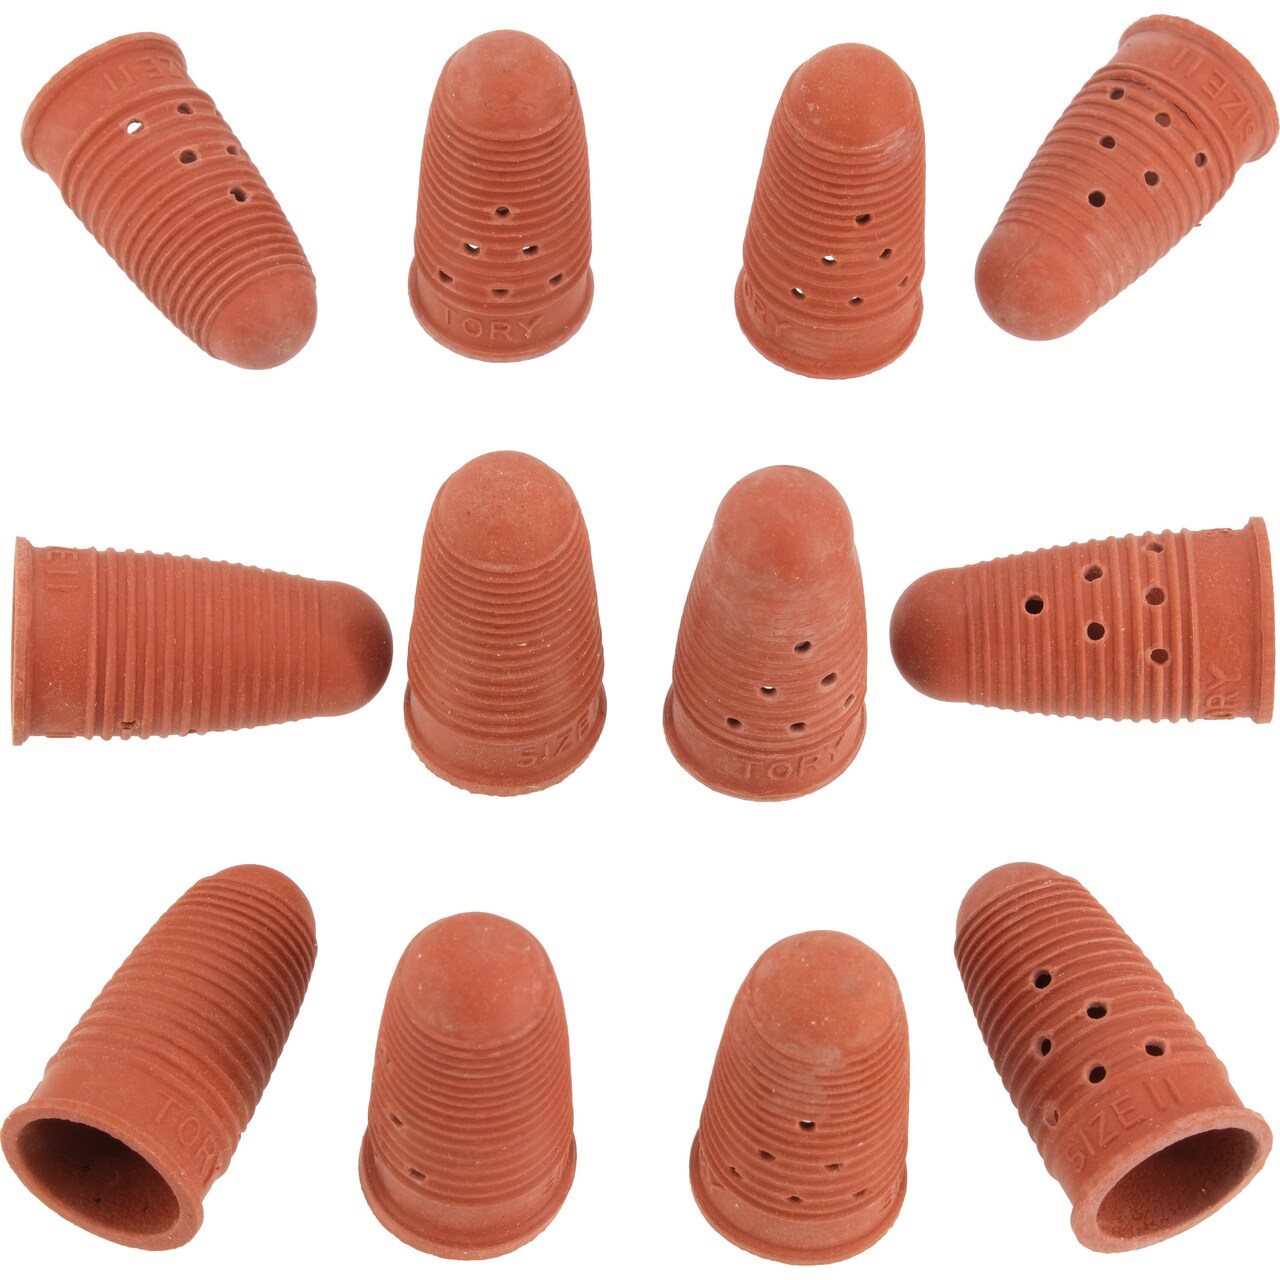 Natural Rubber Fingertip Cots Pads Finger Guards Protection Pack of 12